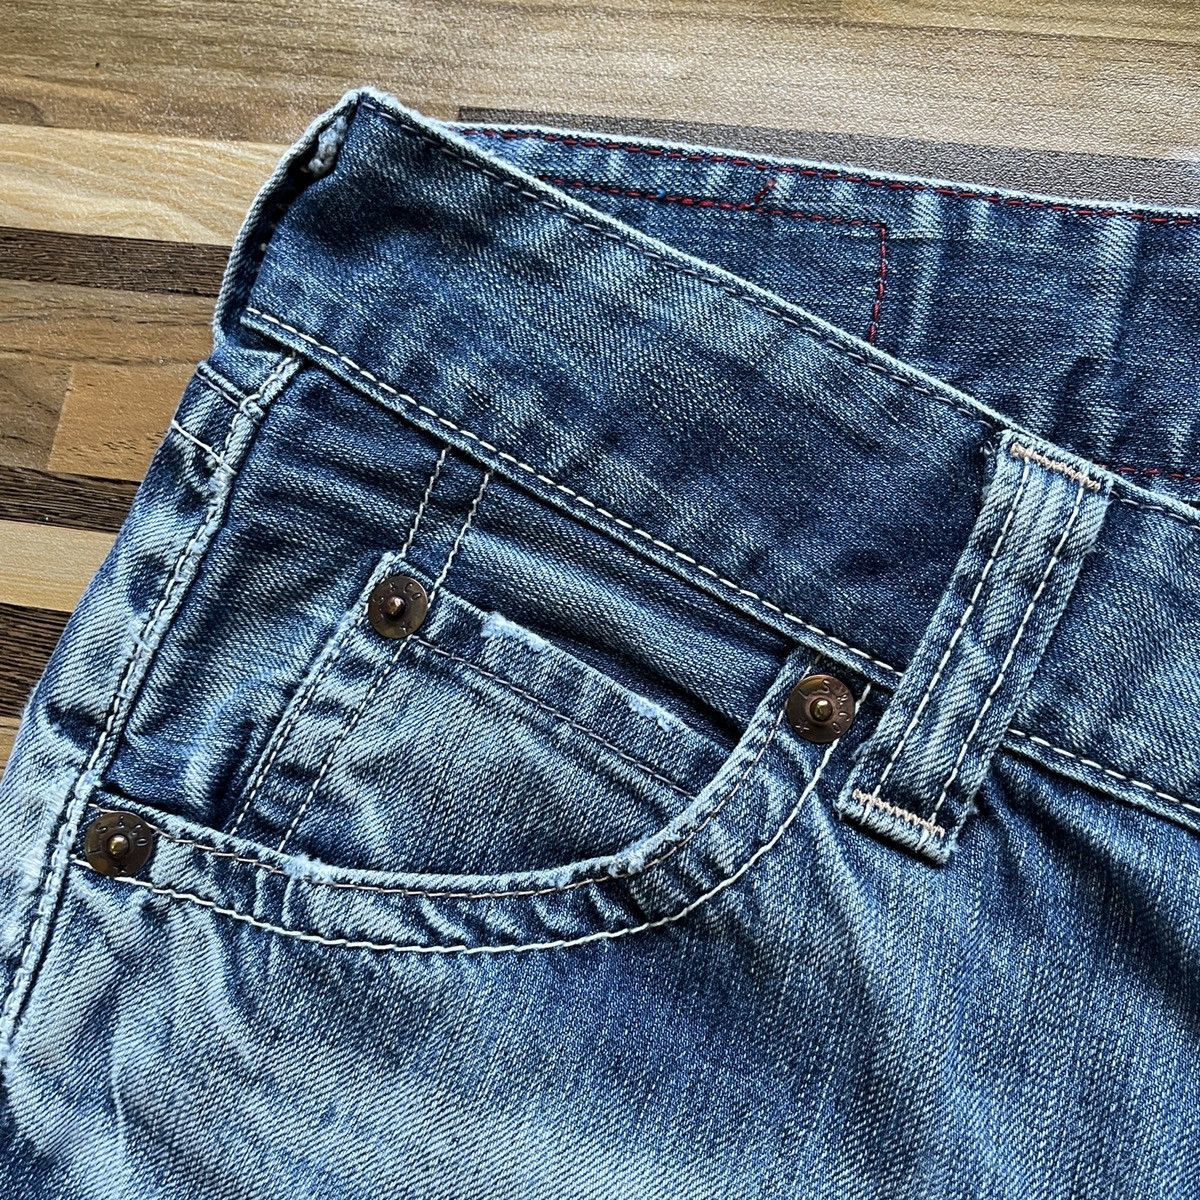 Vintage - Levis White Tag Made In Japan - 11